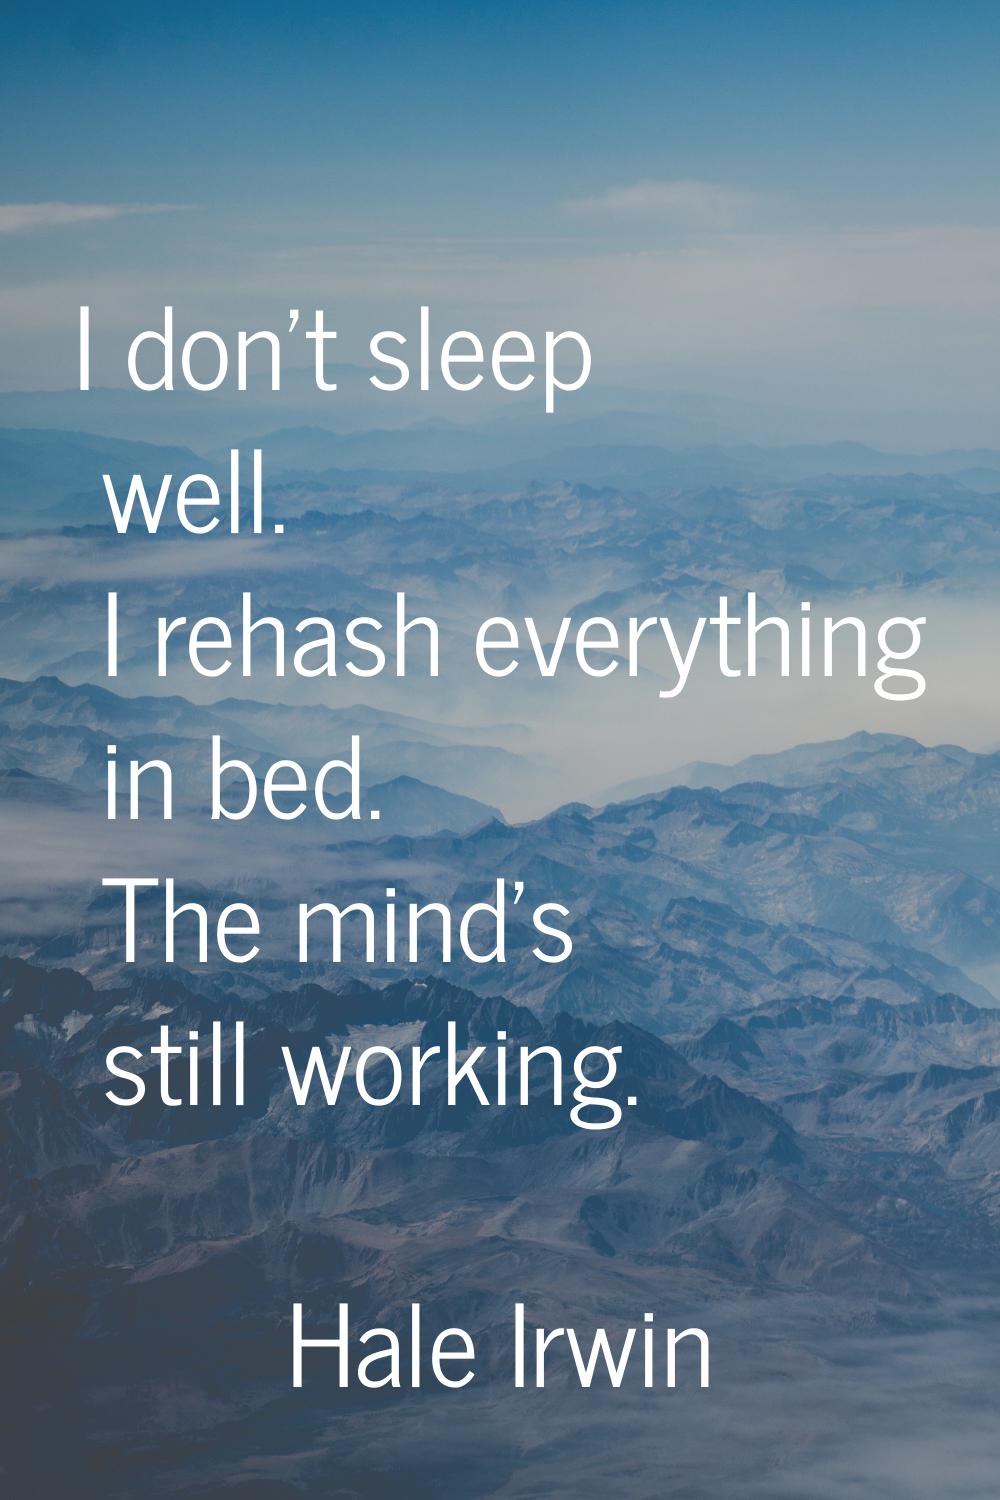 I don't sleep well. I rehash everything in bed. The mind's still working.